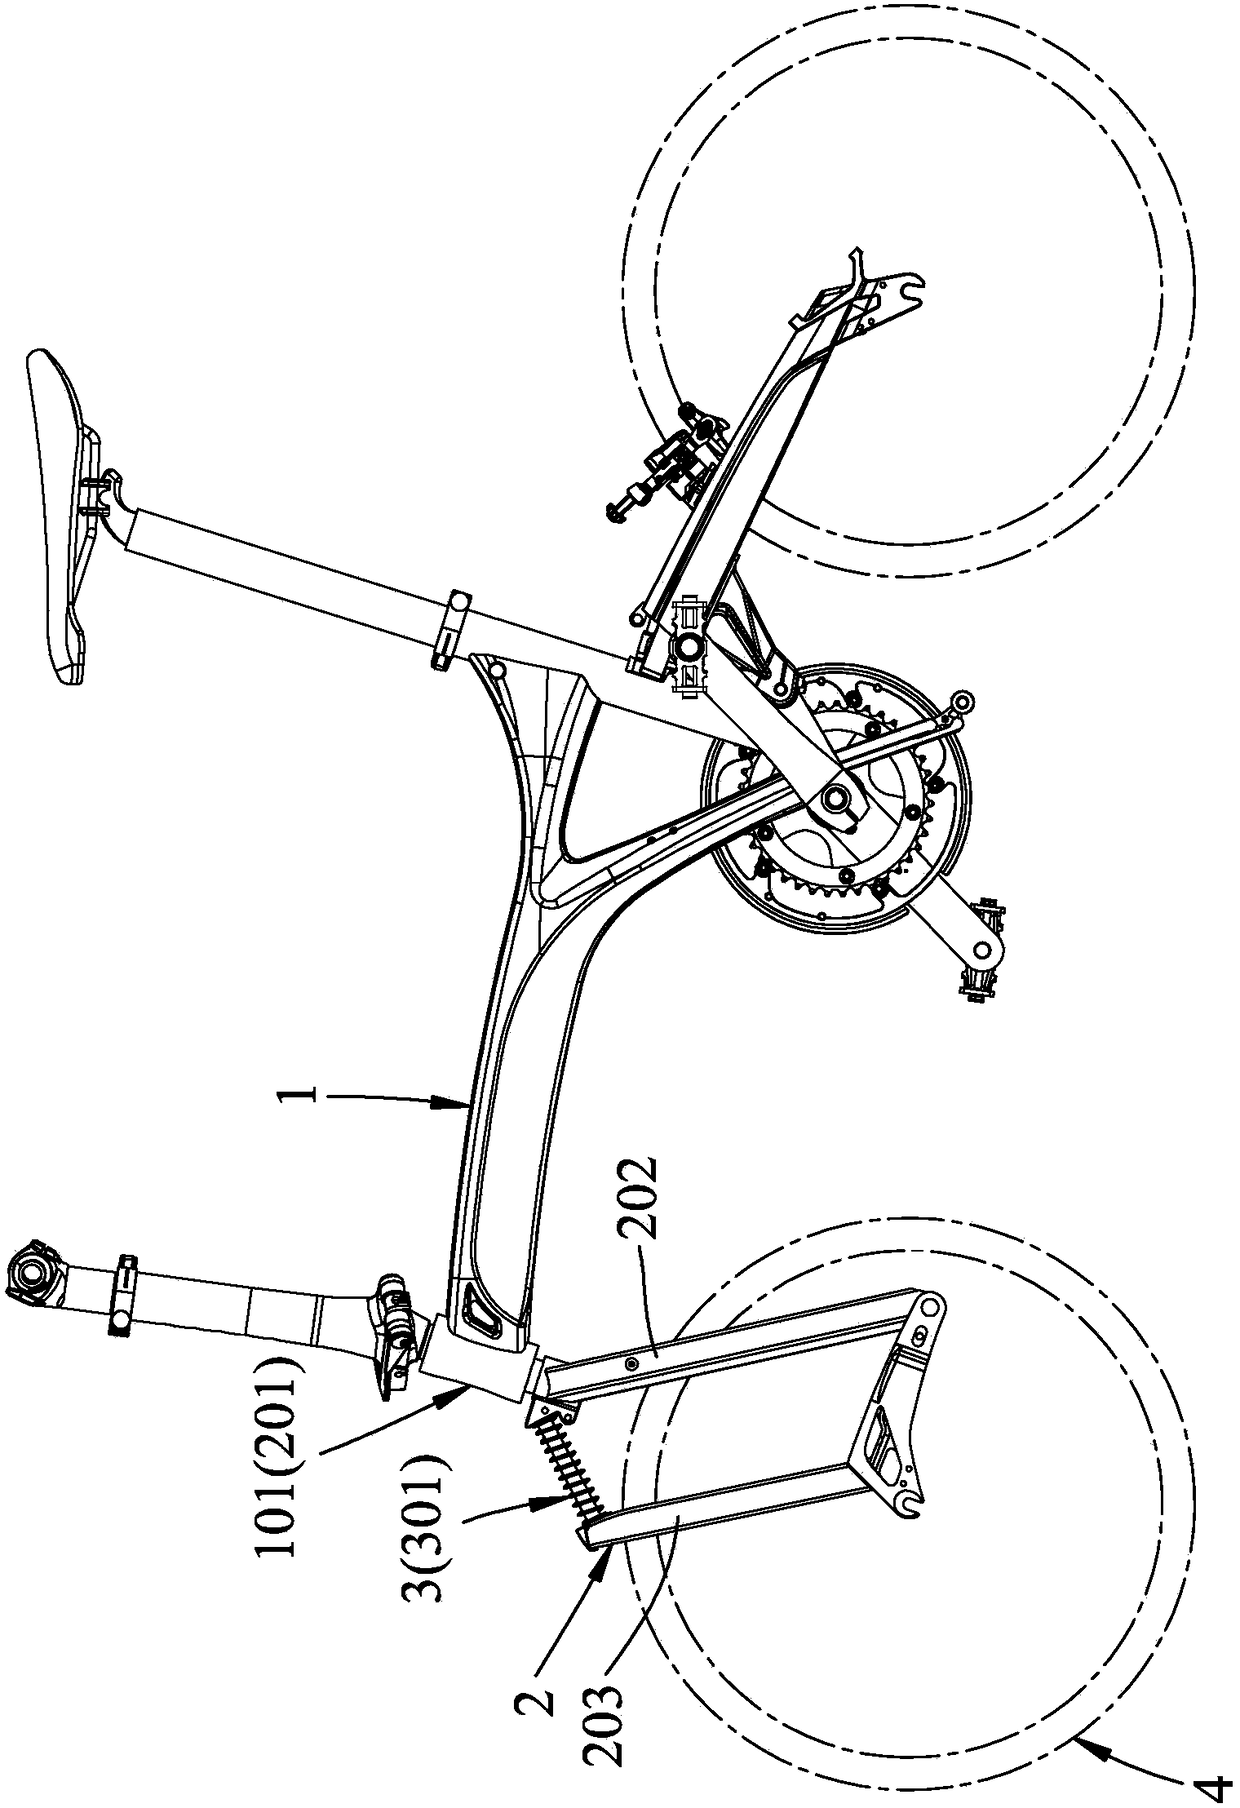 Adjustable Angle's Bicycle Seismic Isolation Device